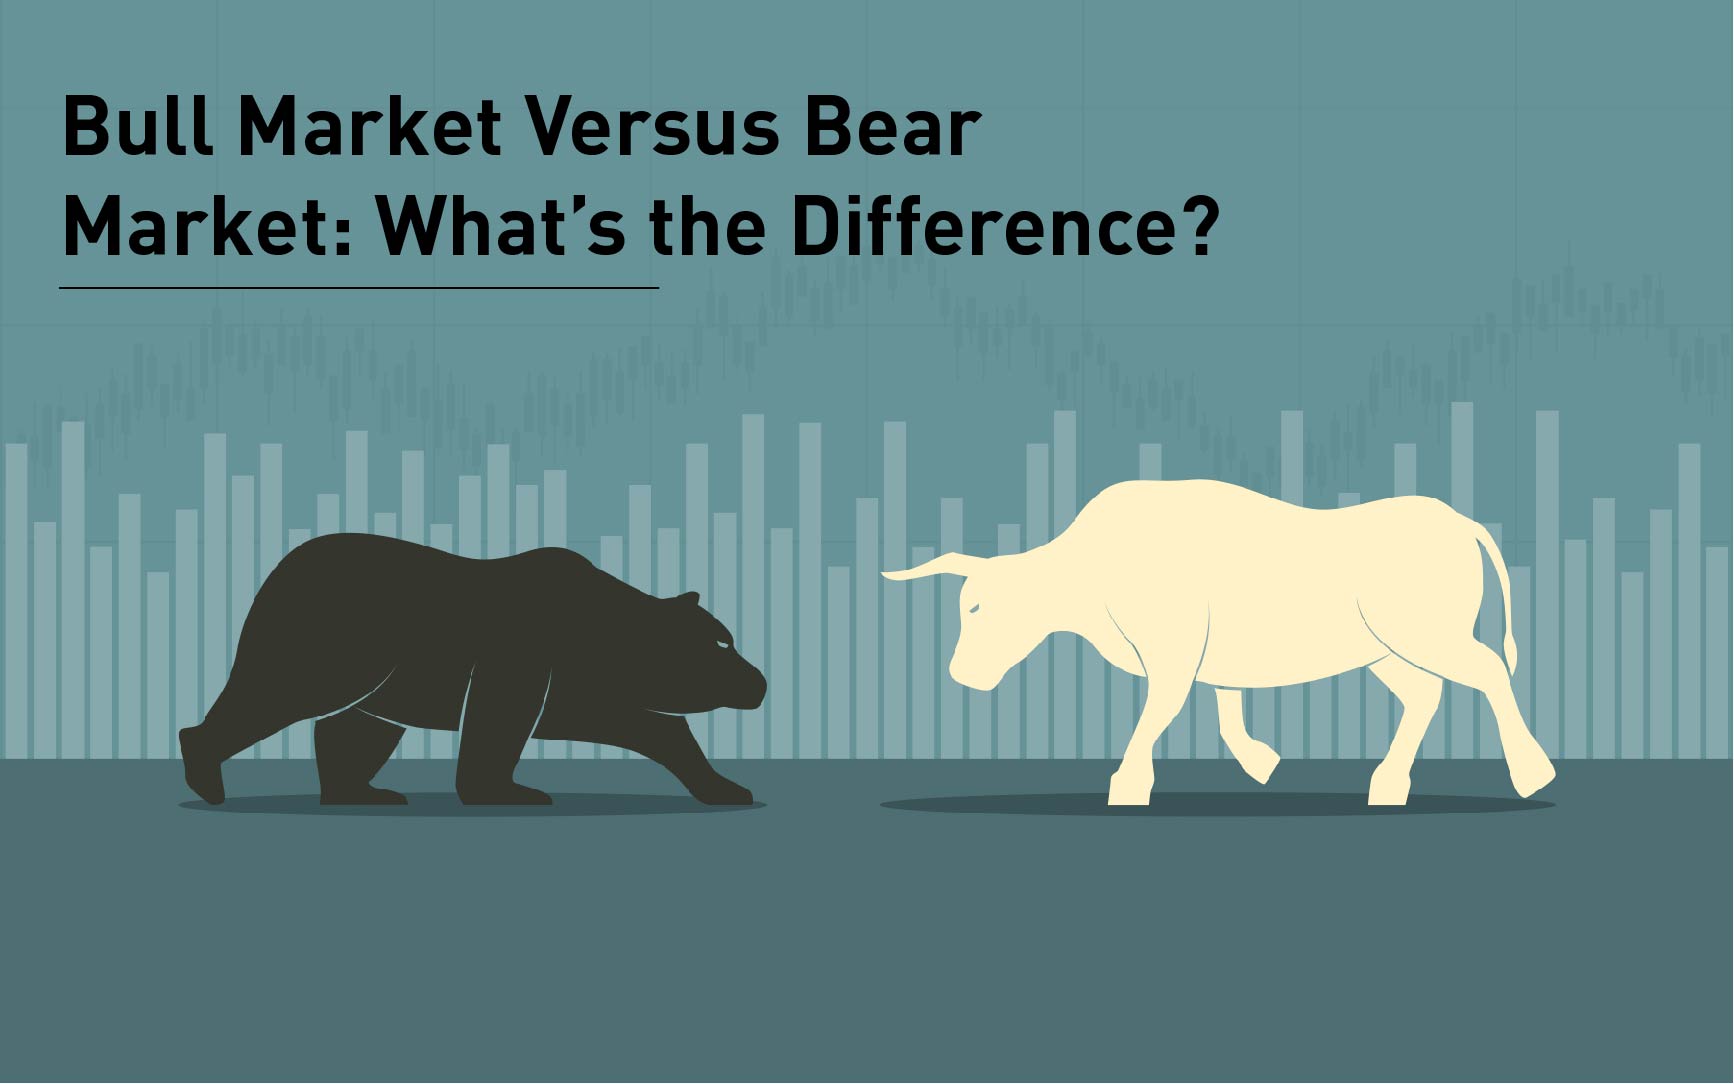 Bull Market Versus Bear Market: What’s the Difference?